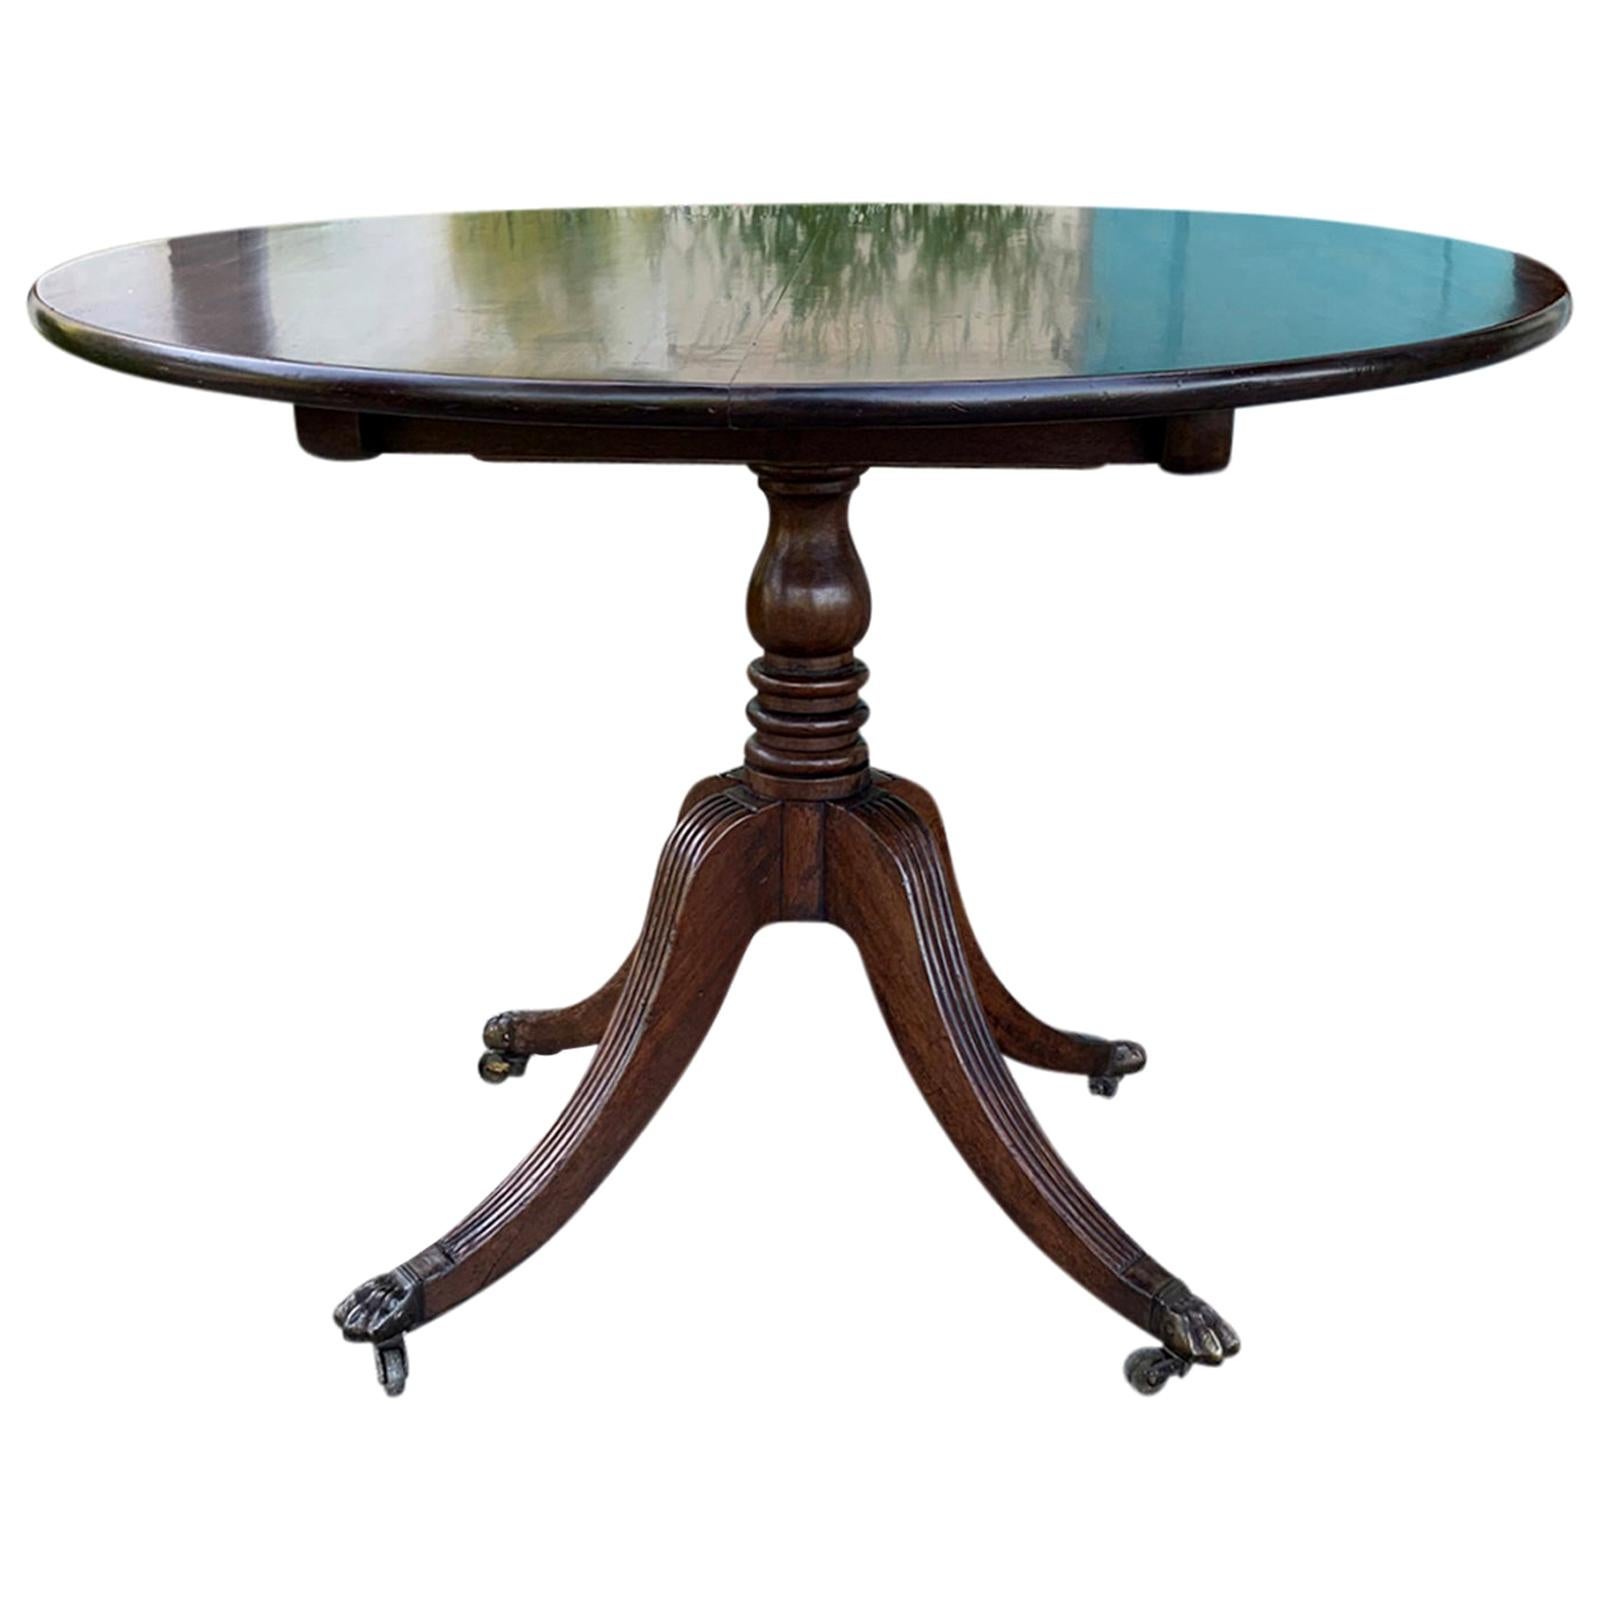 Early 19th Century Regency Style Round Mahogany Tilt-Top Pedestal Table